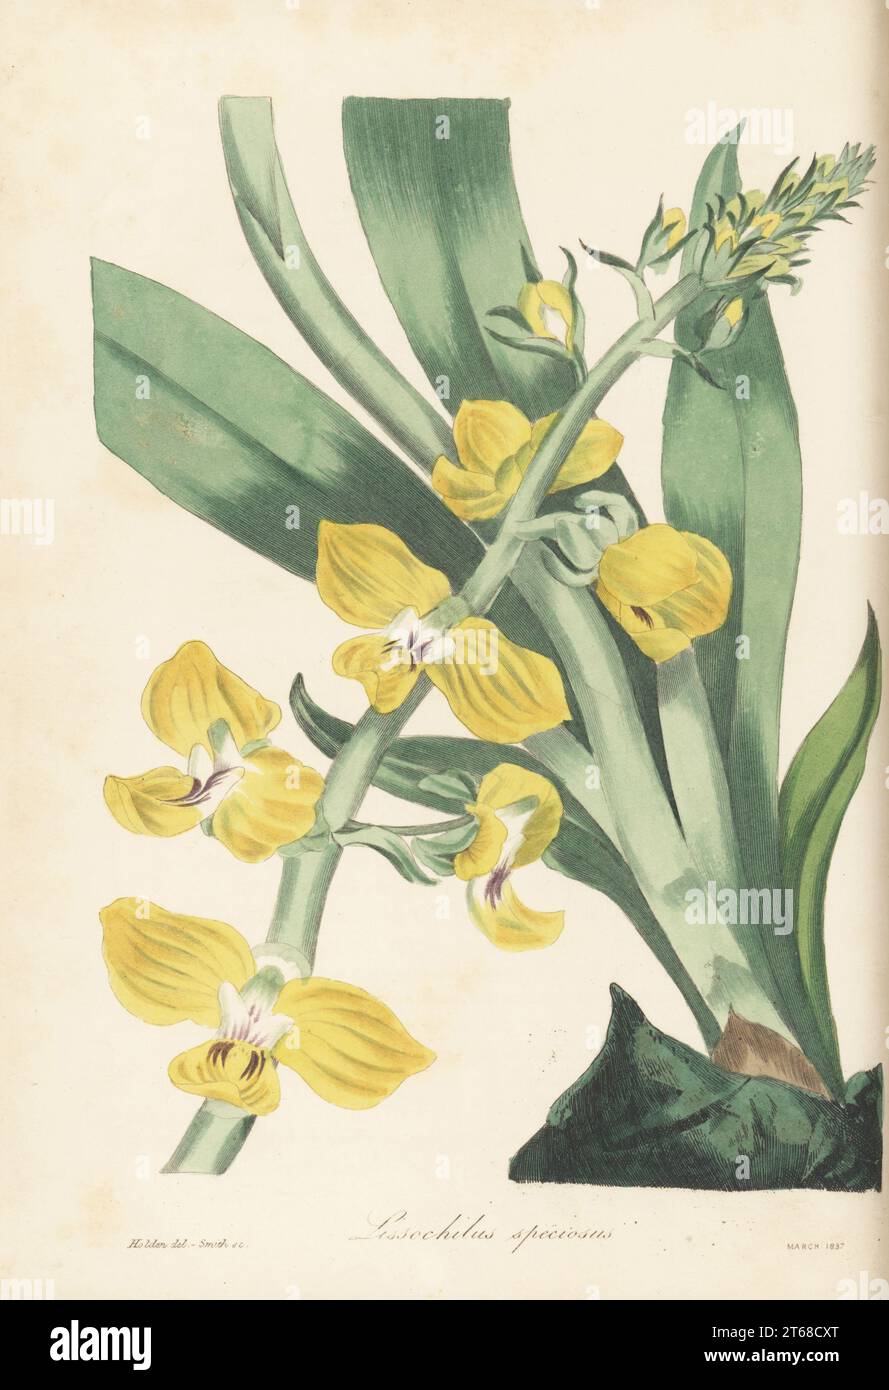 Eulophia speciosa orchid. Native to Africa, introduced from the Cape of Good Hope by nurseryman William Griffin of South Lambeth. Mr. Griffin's showy lissochilus, Lissochilus speciosus. Handcoloured engraving by Frederick William Smith after a botanical illustration by Samuel Holden from Joseph Paxtons Magazine of Botany, and Register of Flowering Plants, Volume 4, Orr and Smith, London, 1837. Stock Photo